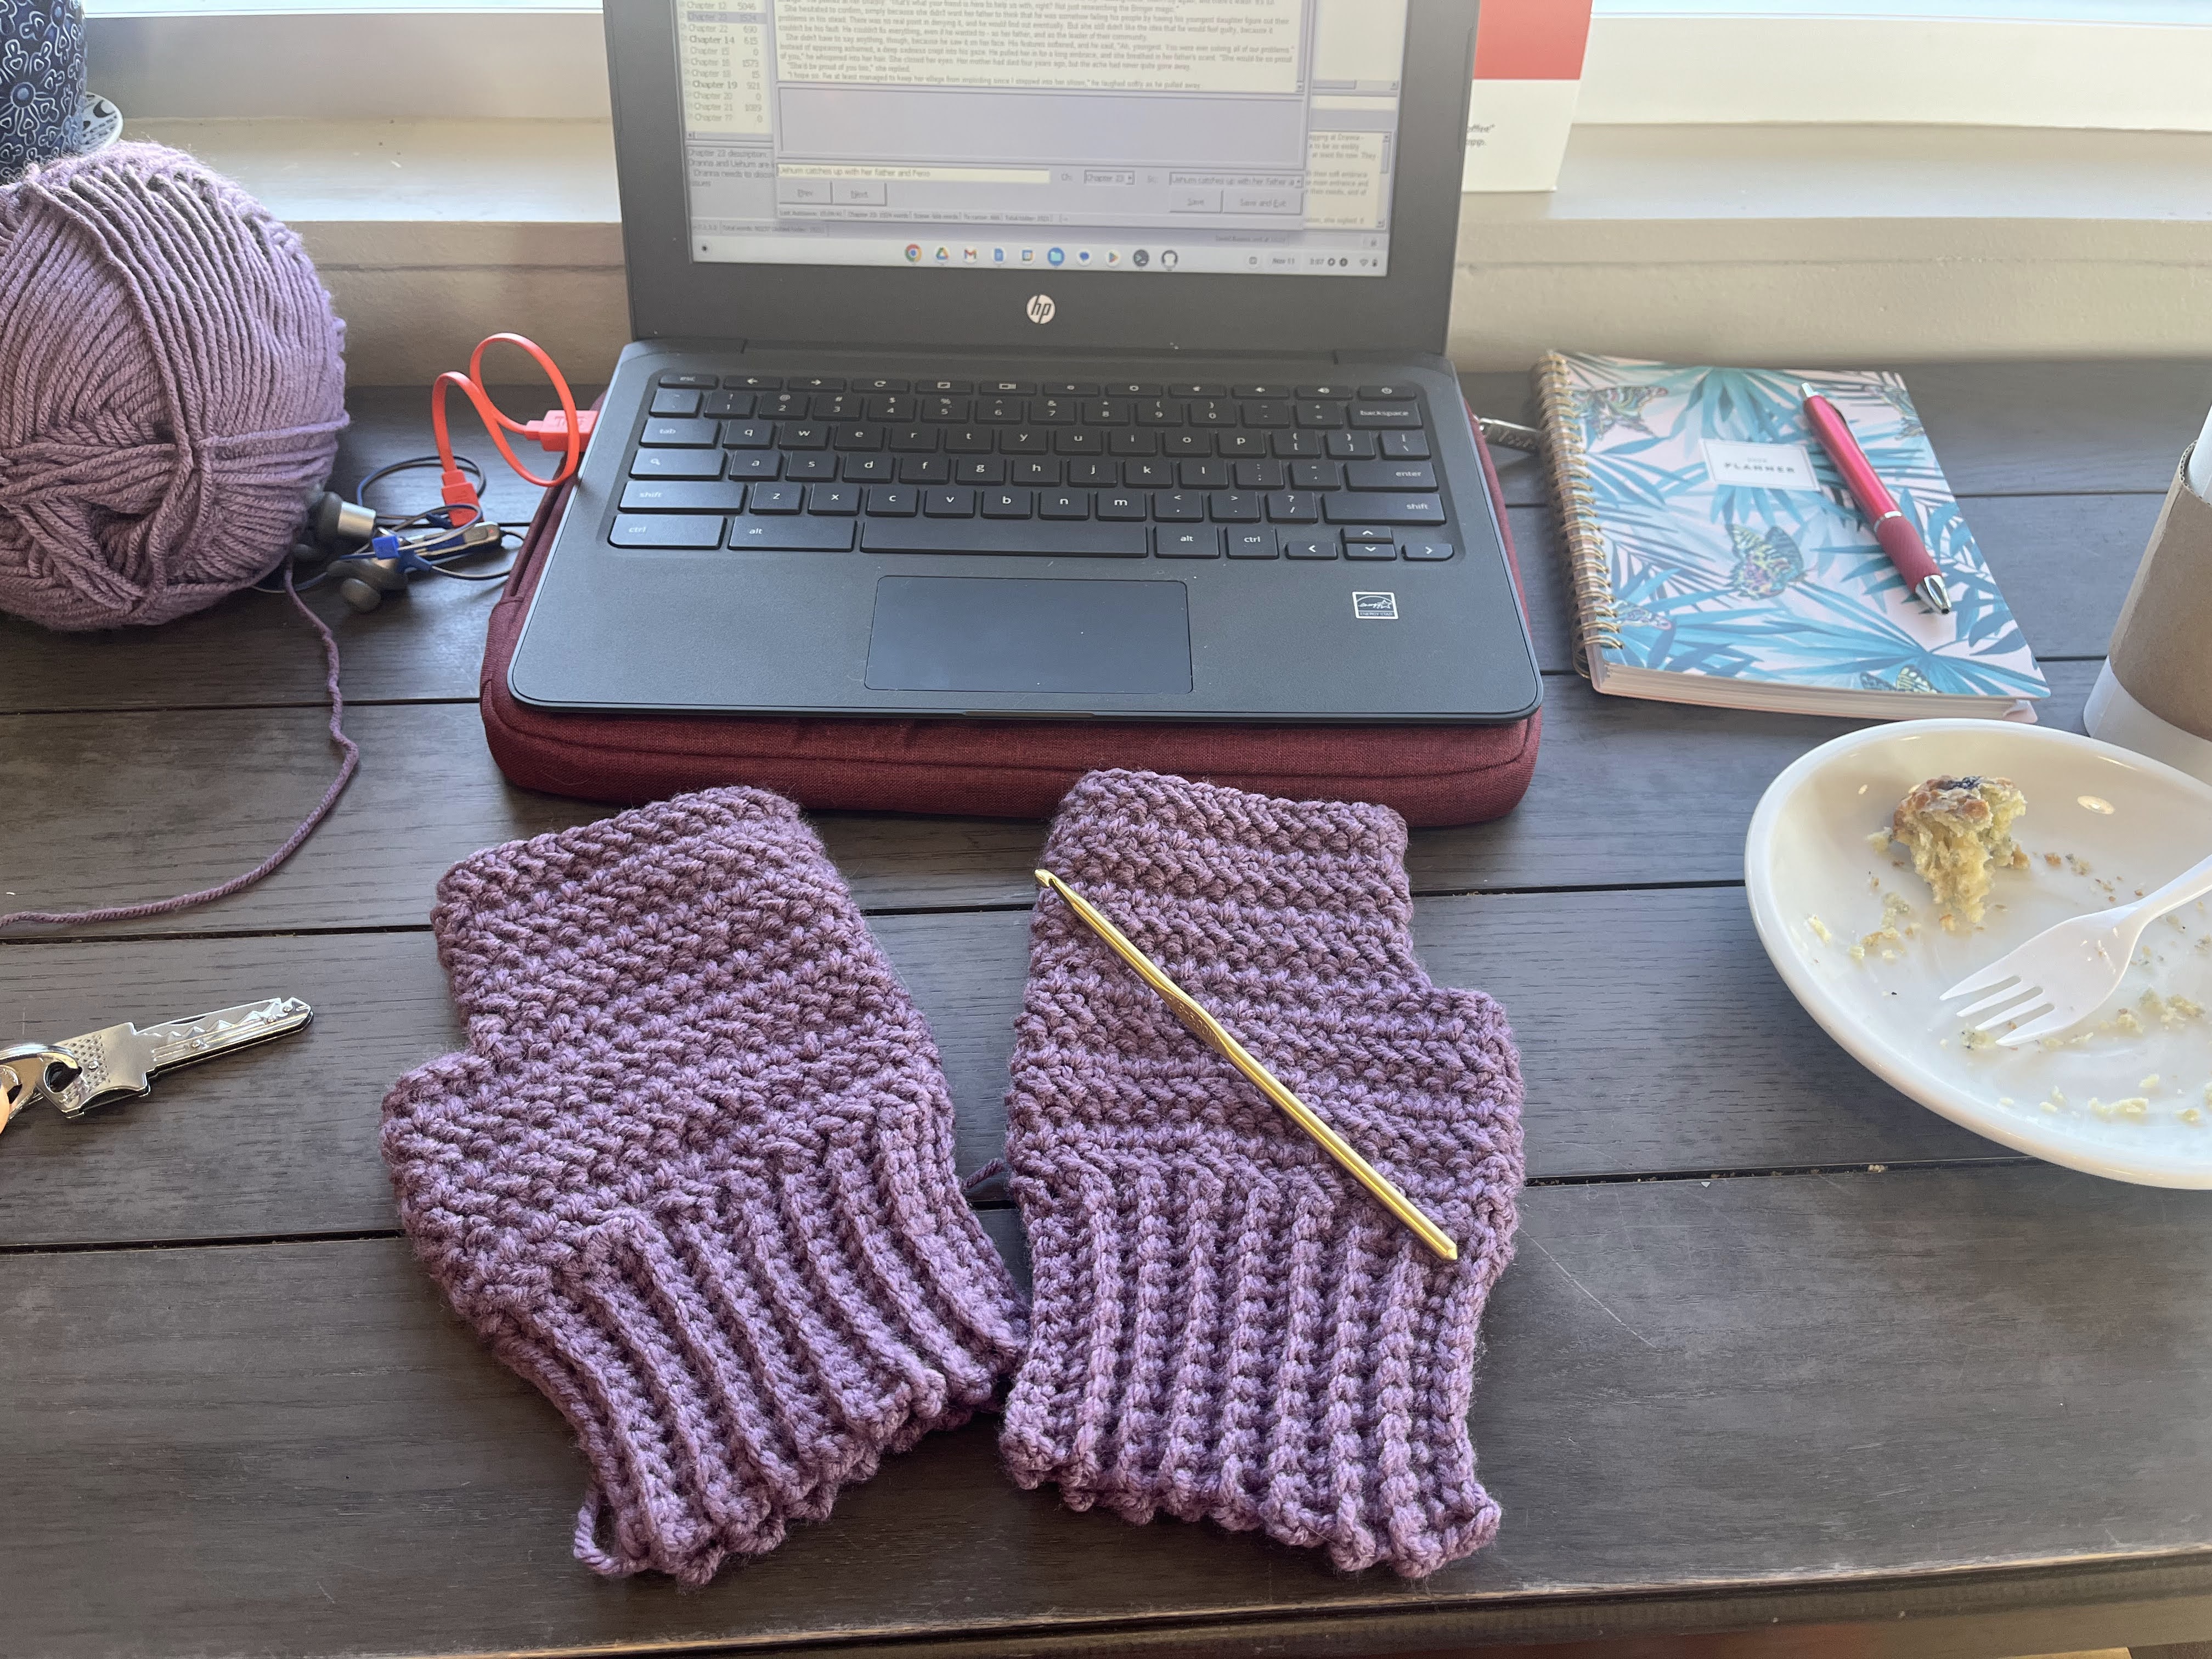 A pair of crochet gloves in front of a laptop